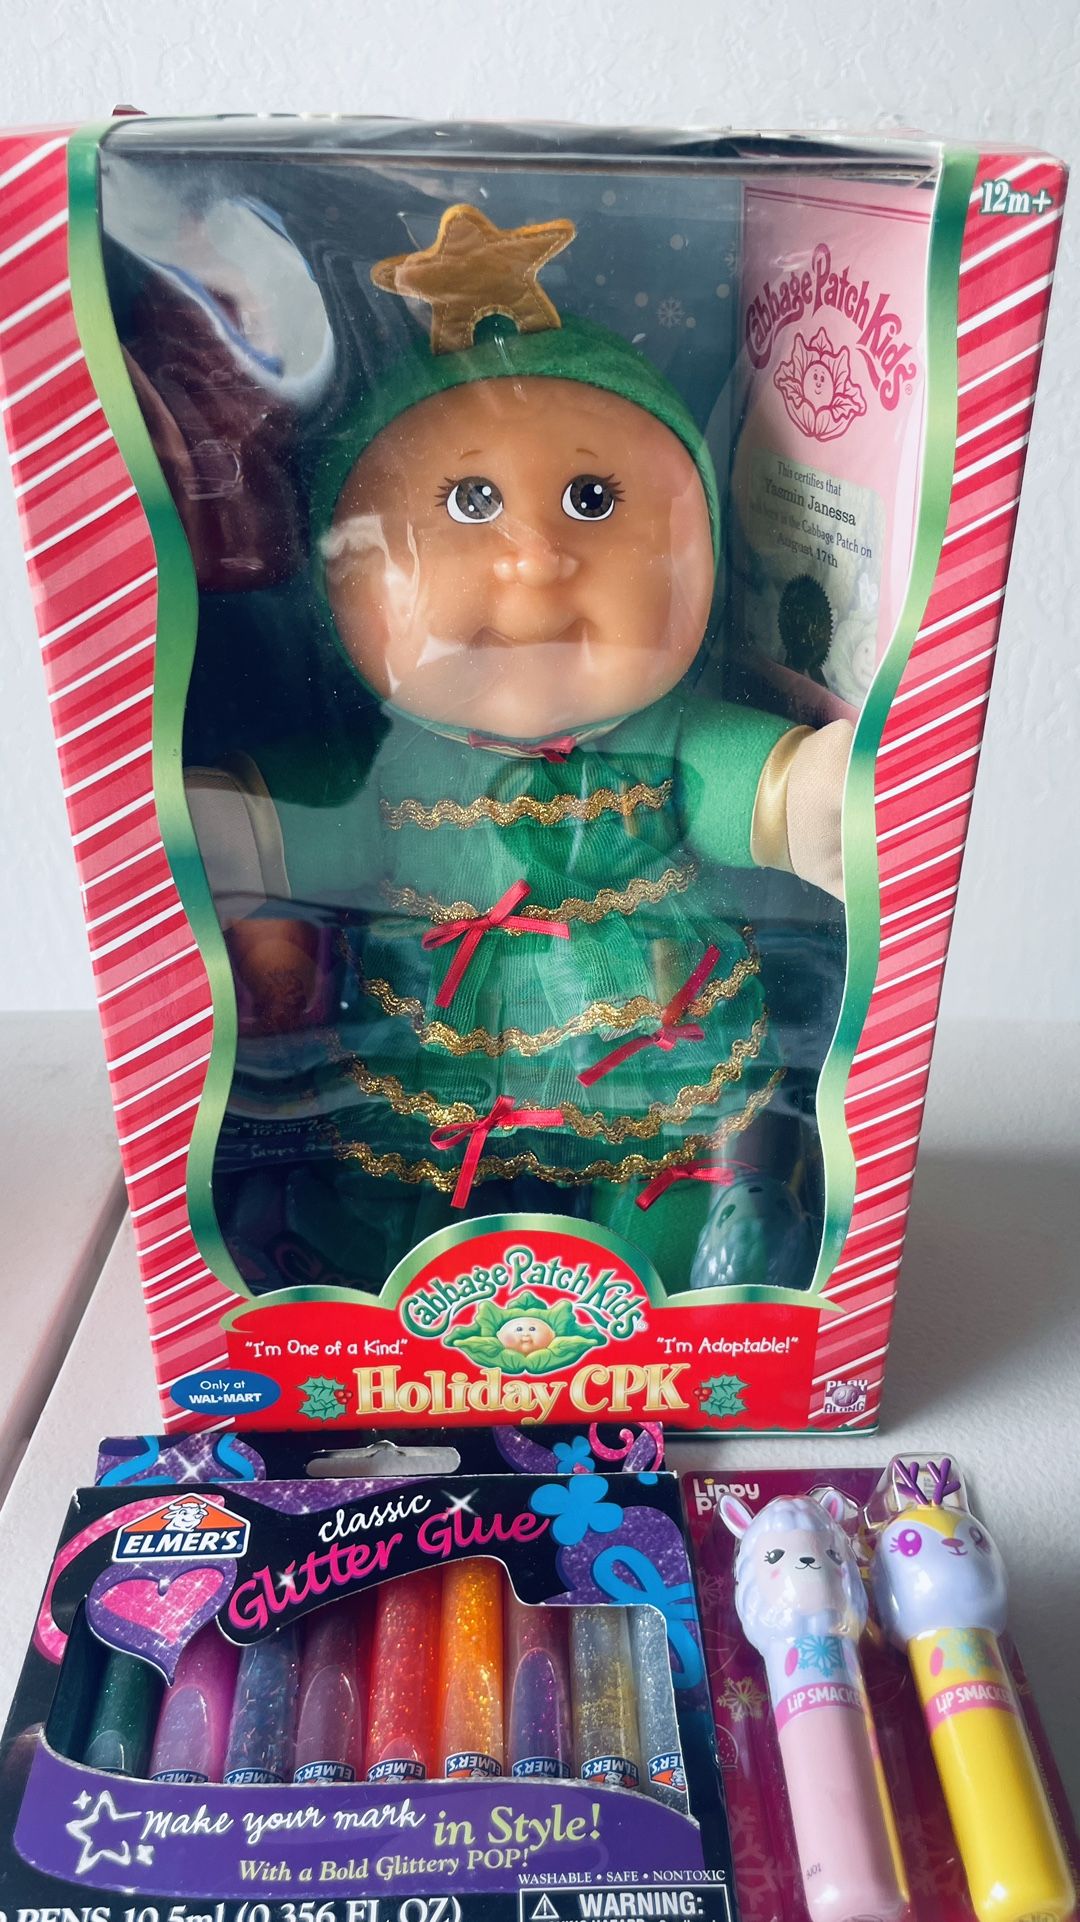 Cabbage Patch Doll Still in Box $15 